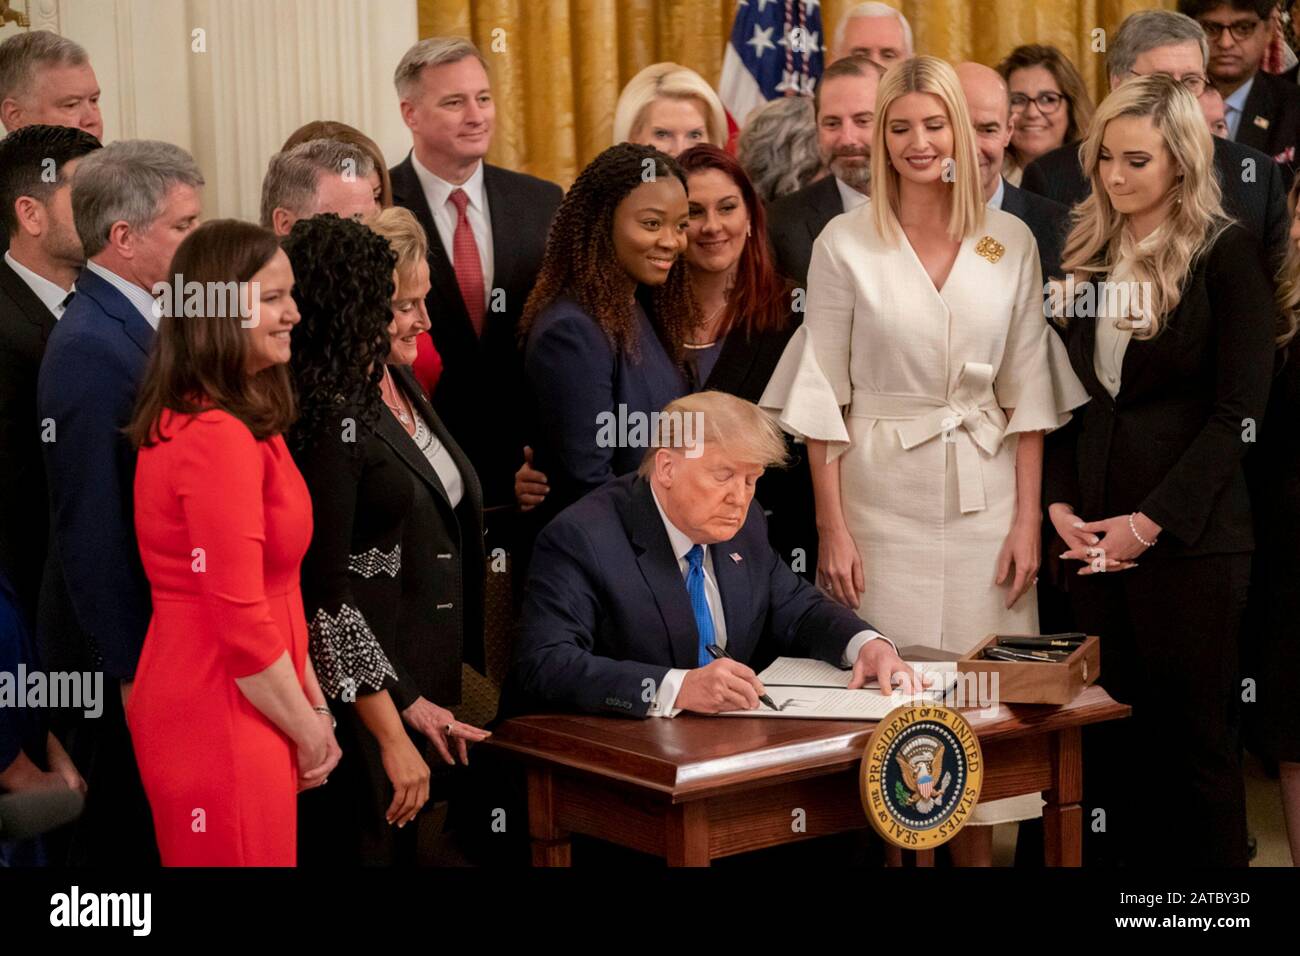 Washington, United States Of America. 31st Jan, 2020. Washington, United States of America. 31 January, 2020. U.S President Donald Trump, surrounded by survivors, officials and his daughter Ivanka Trump, right, signs an executive order to help combat human trafficking during a ceremony in the East Room of the White House January 31, 2020 in Washington, DC. The event took place following the White House Summit on Human Trafficking in honor of the 20th Anniversary of the Trafficking Victims Protection Act. Credit: Andrea Hanks/White House Photo/Alamy Live News Stock Photo